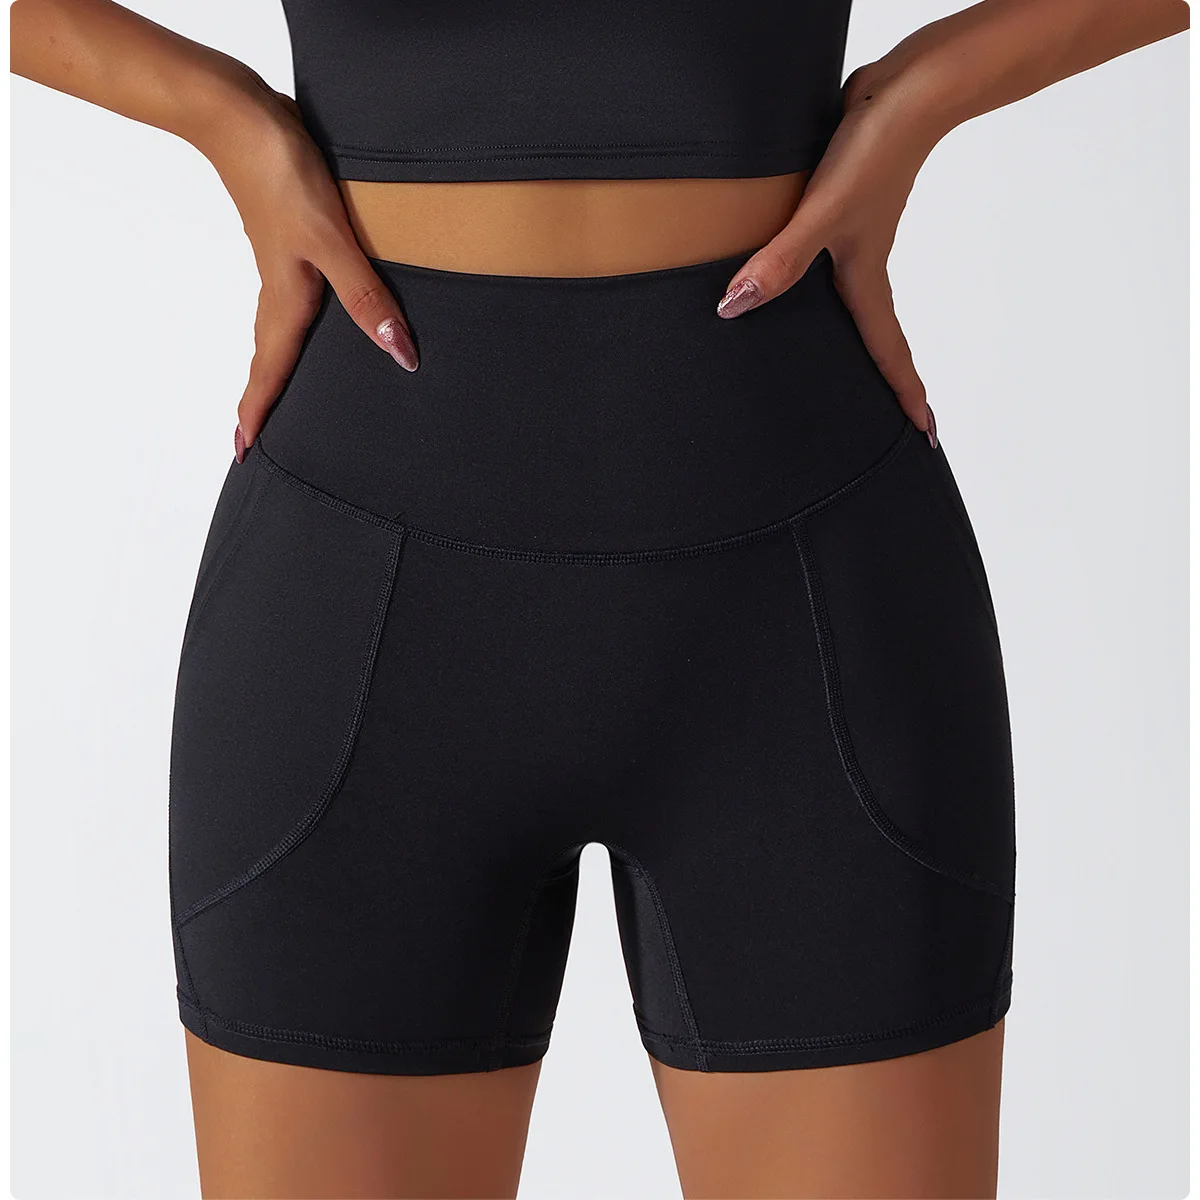 Eco-friendly recycled yoga shorts lulu nude fitness pants quick-drying leggings high waist pocket running sports shorts